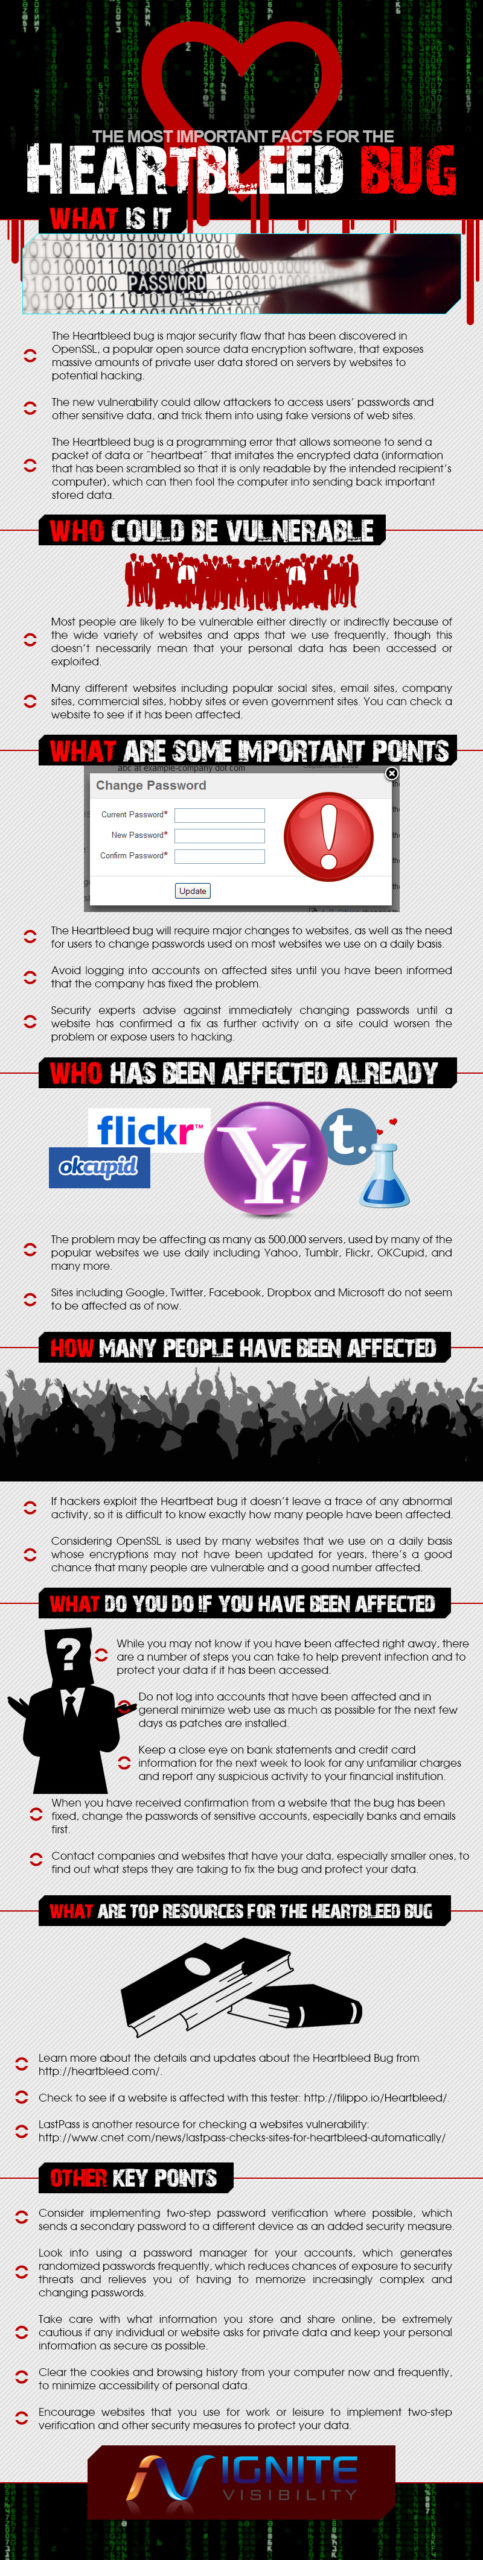 Heartbleed Facts